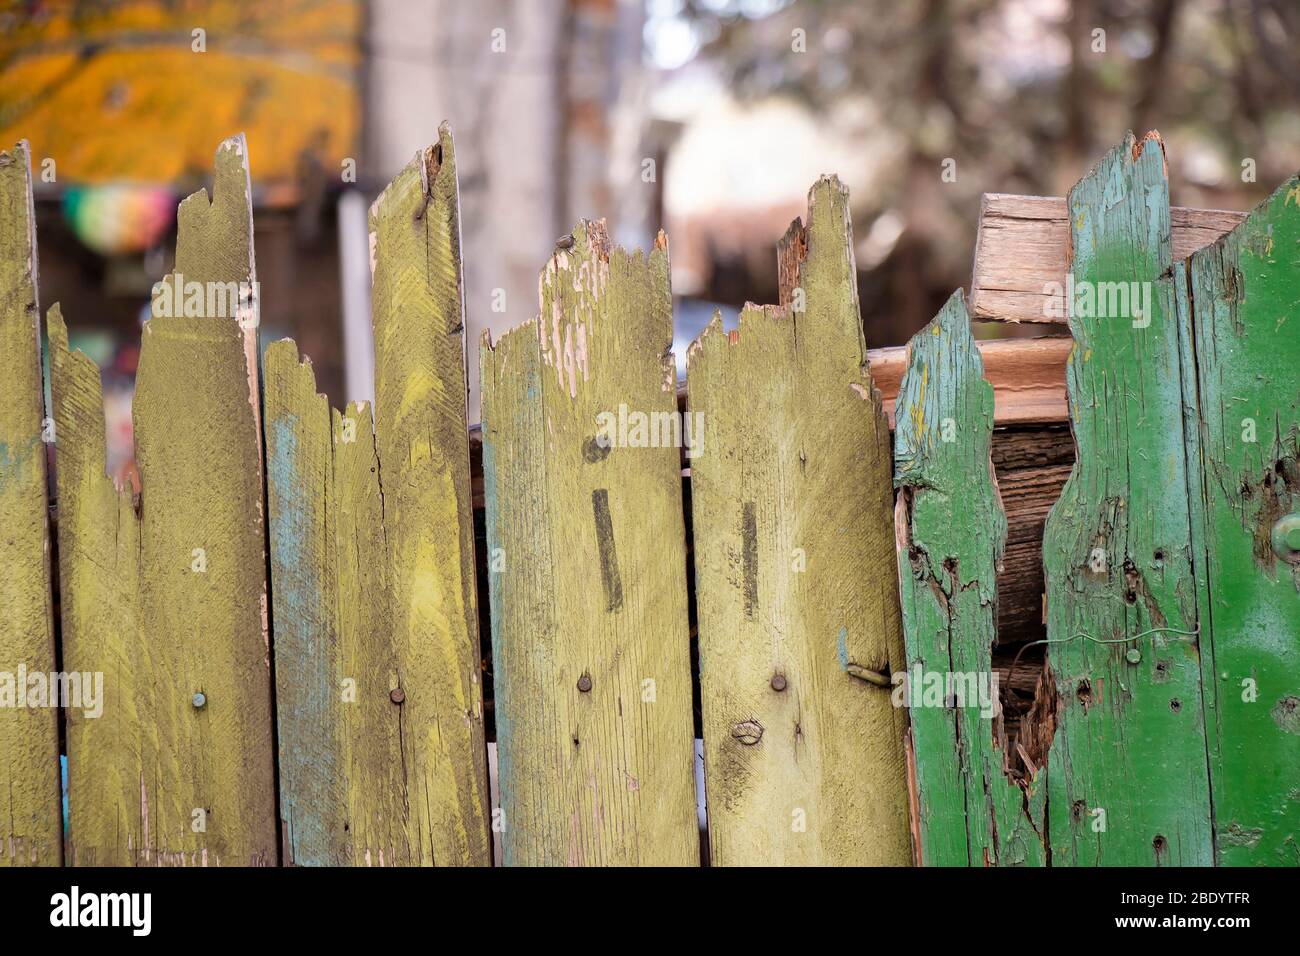 Detail of old nailed rusty wooden fence with green color peeling off Stock Photo